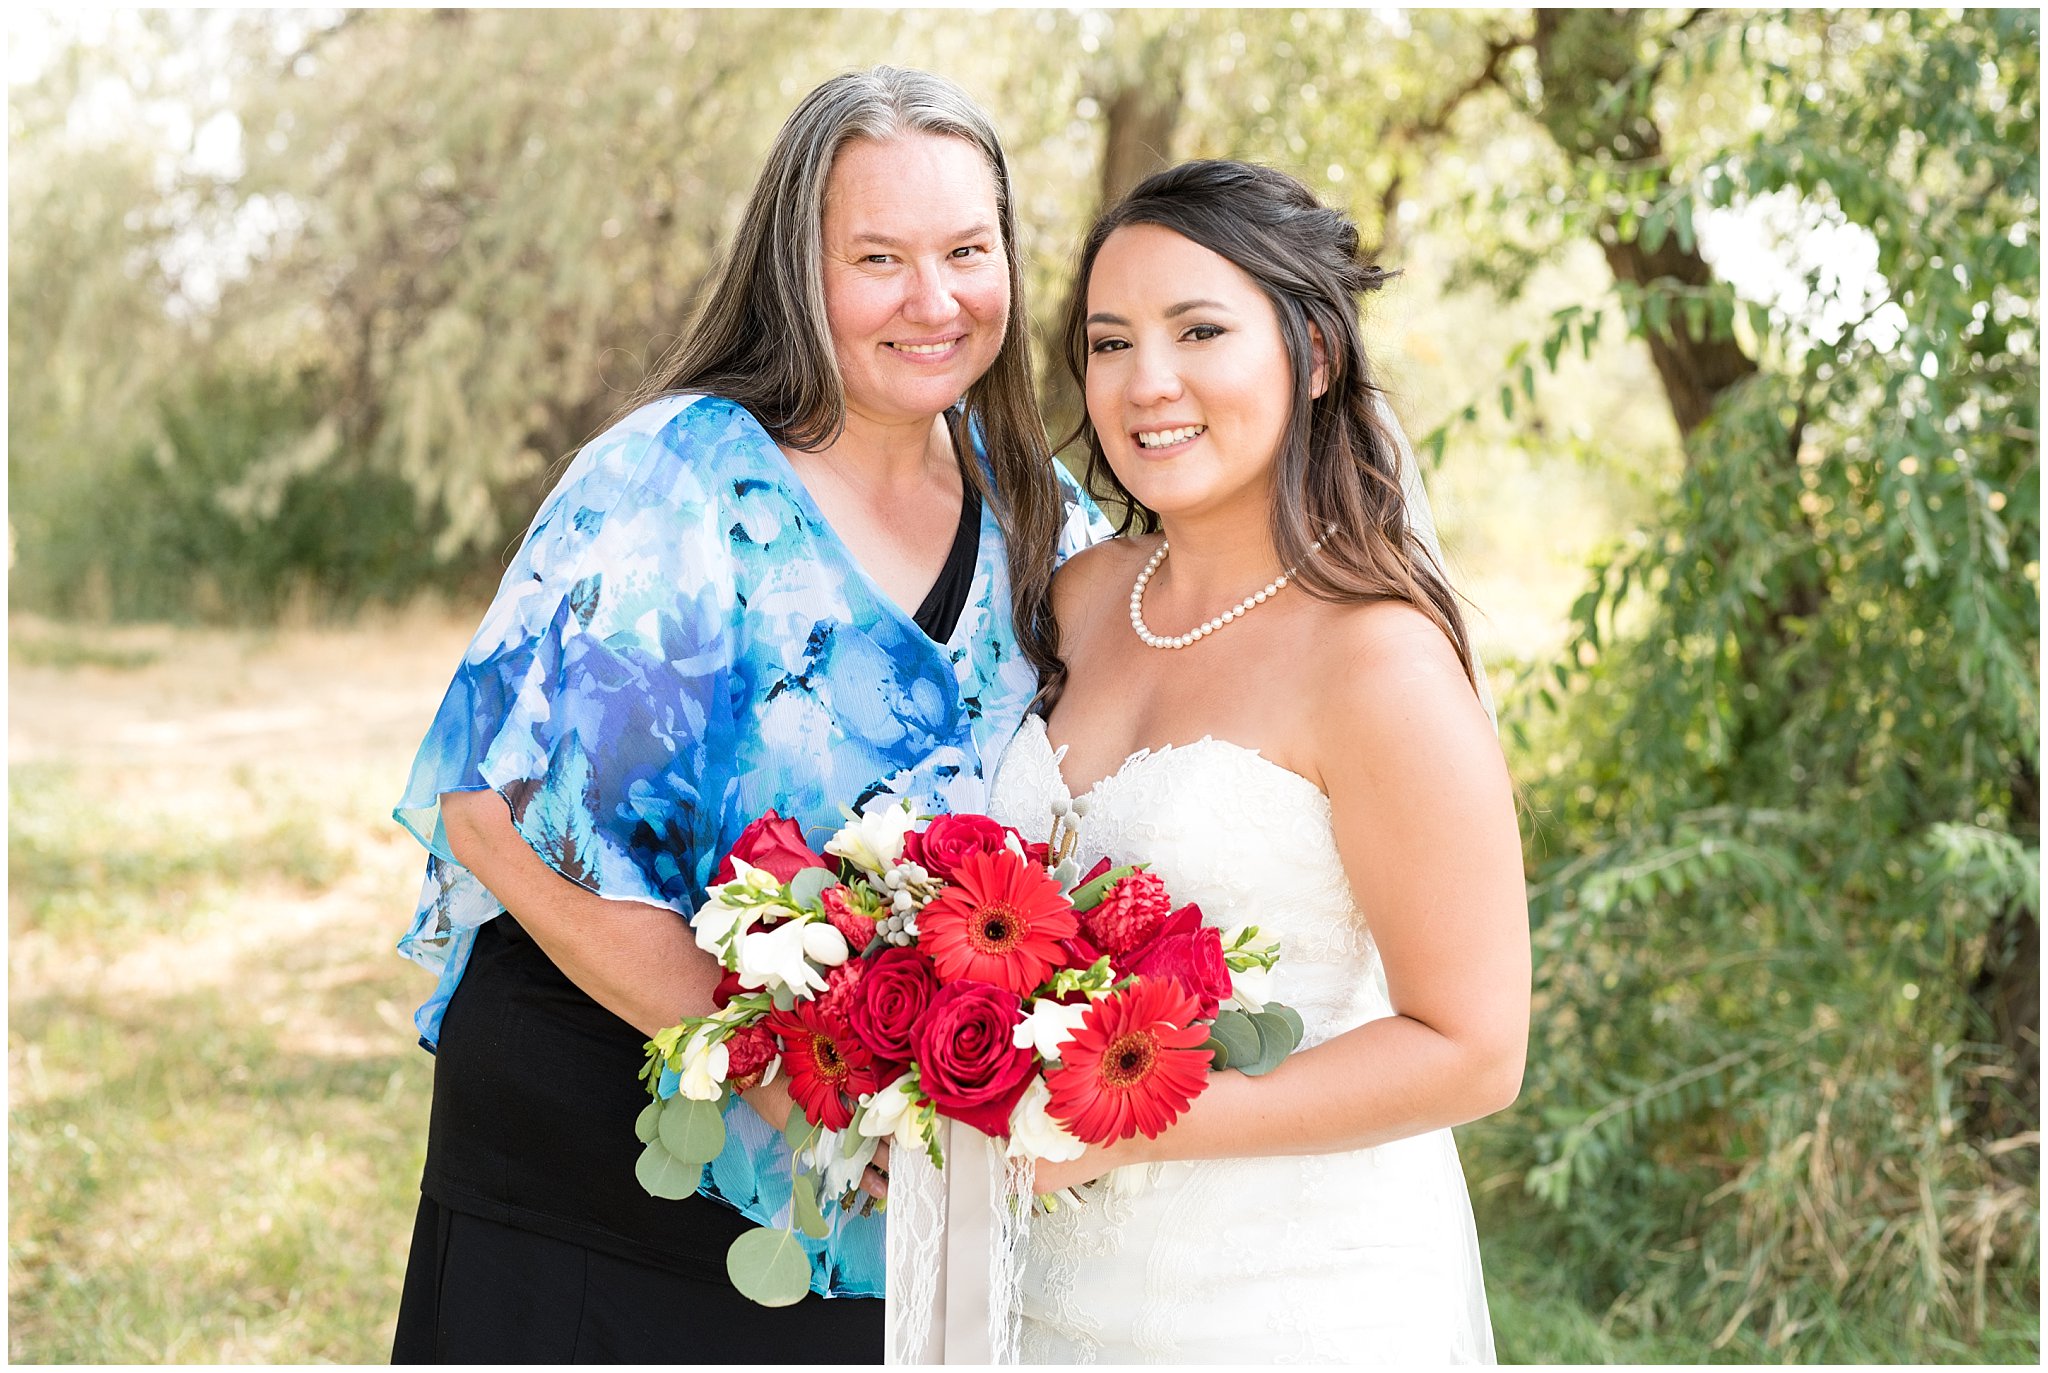 Bride and her mom with bouquet | Red and Grey wedding | Davis County Outdoor Wedding | Jessie and Dallin Photography